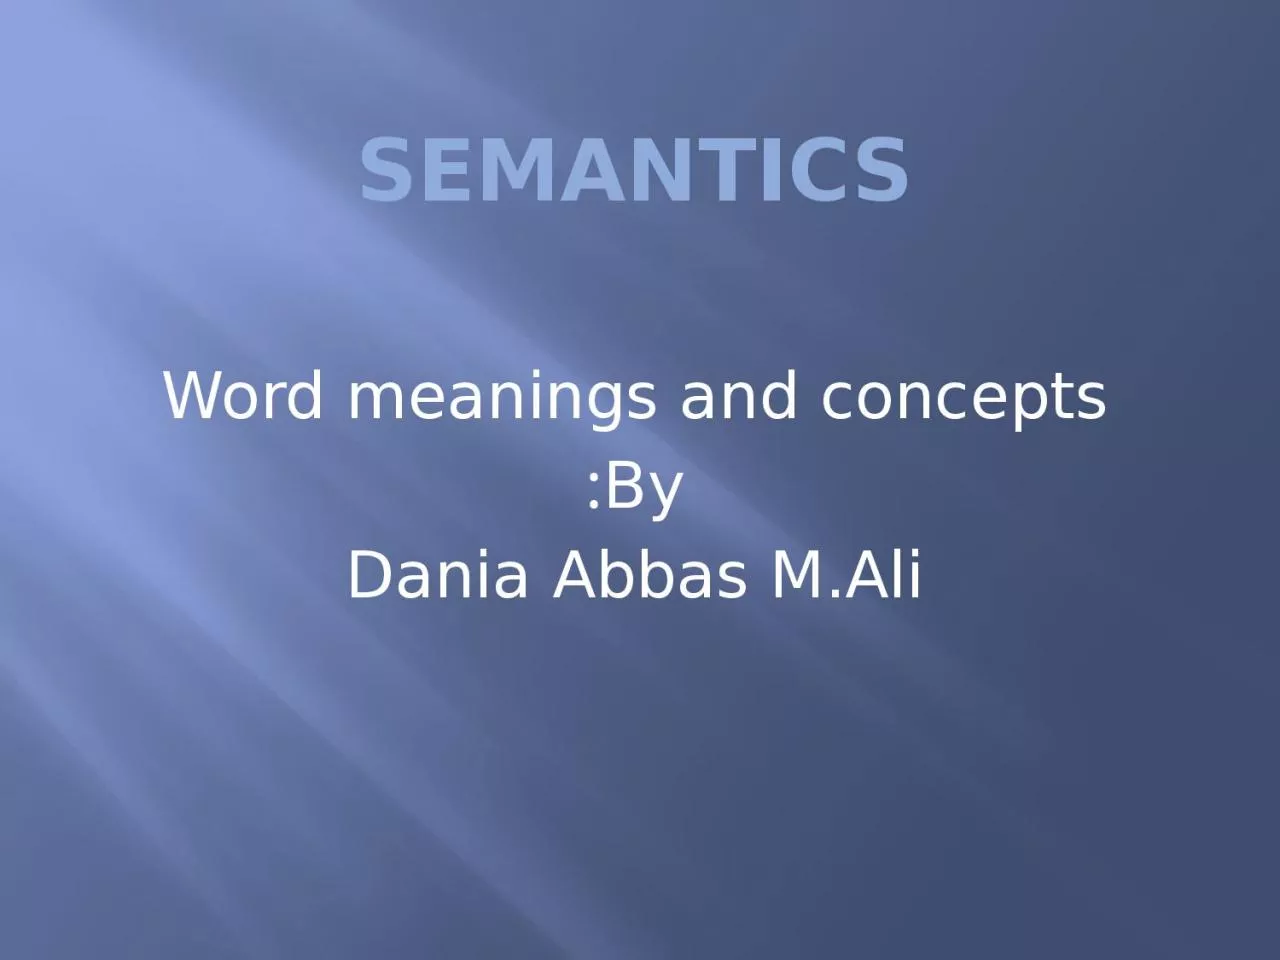 SEMANTICS Word meanings and concepts